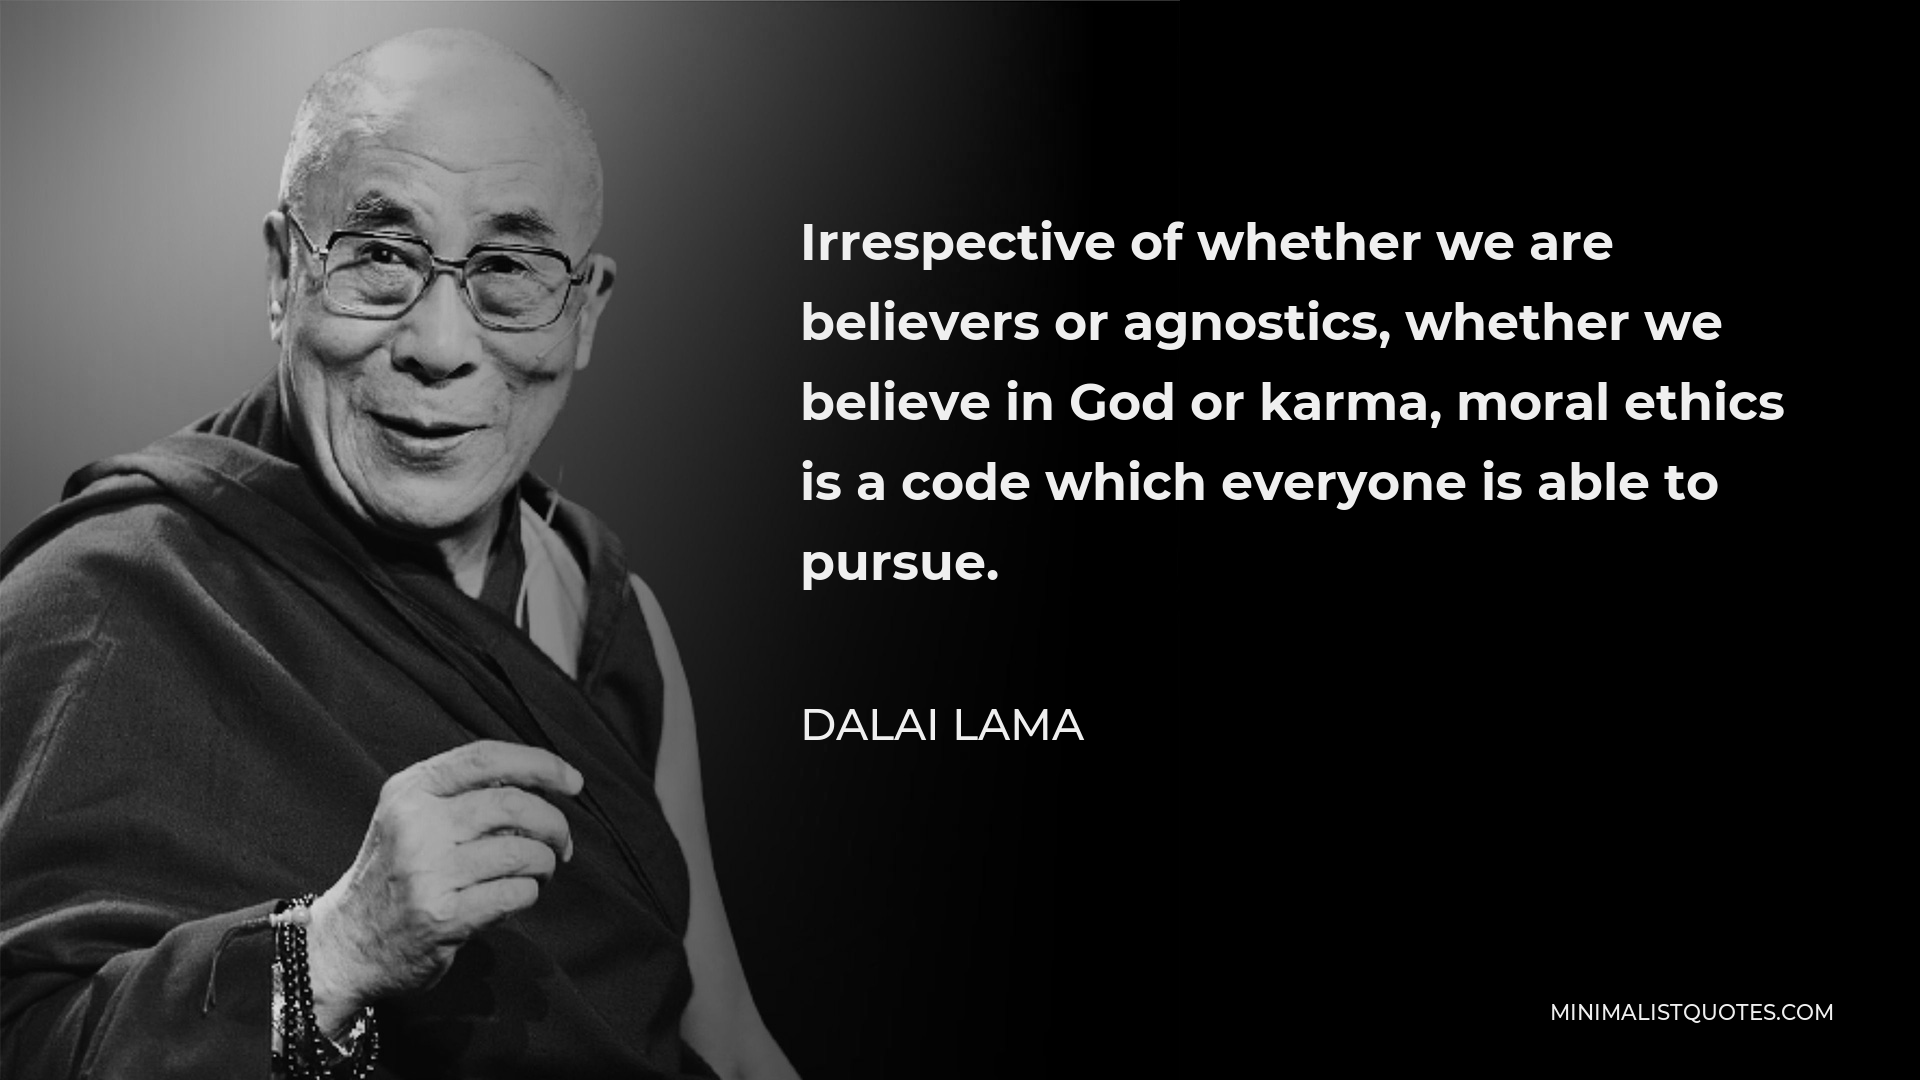 Dalai Lama Quote - Irrespective of whether we are believers or agnostics, whether we believe in God or karma, moral ethics is a code which everyone is able to pursue.